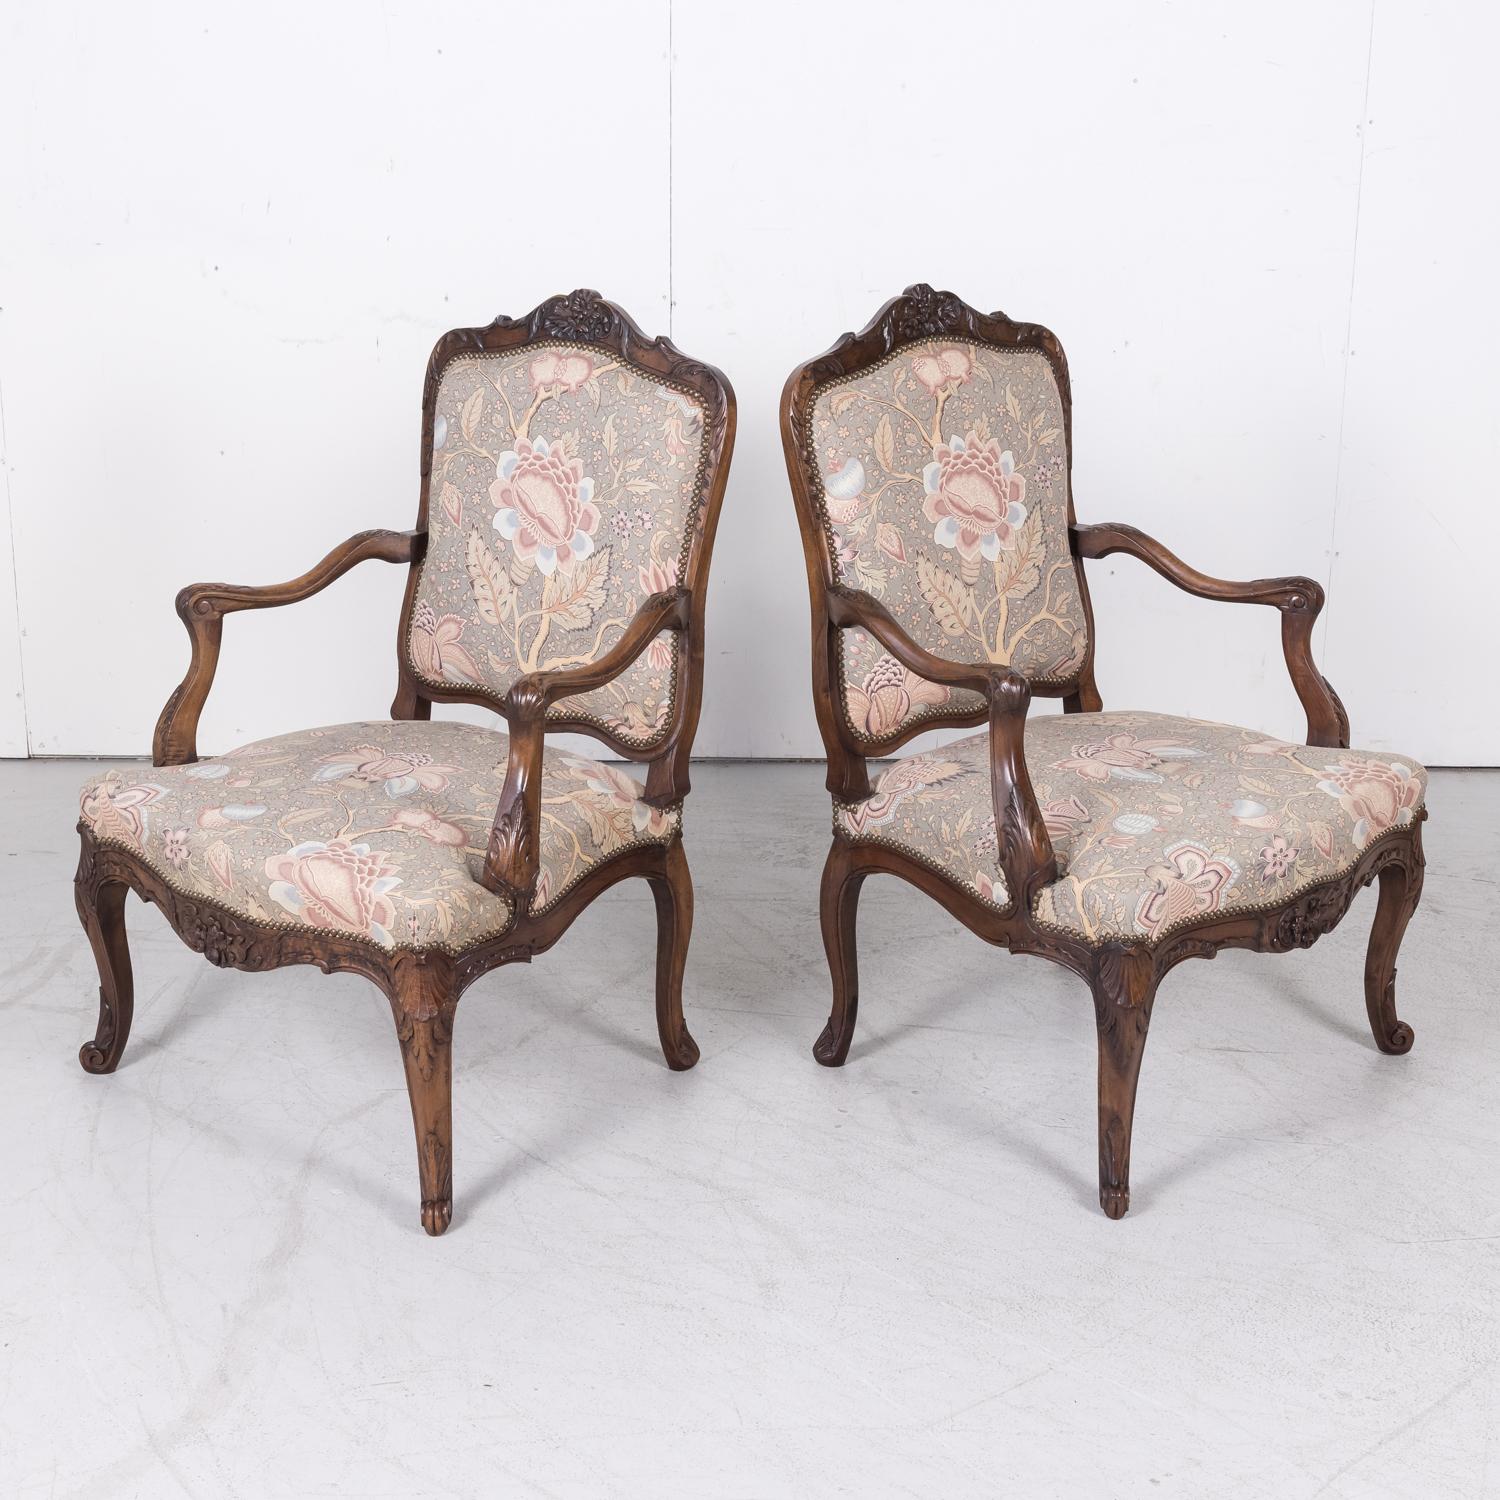 Fine Pair of 18th Century French Louis XV Period Carved Walnut Fauteuils In Good Condition For Sale In Birmingham, AL